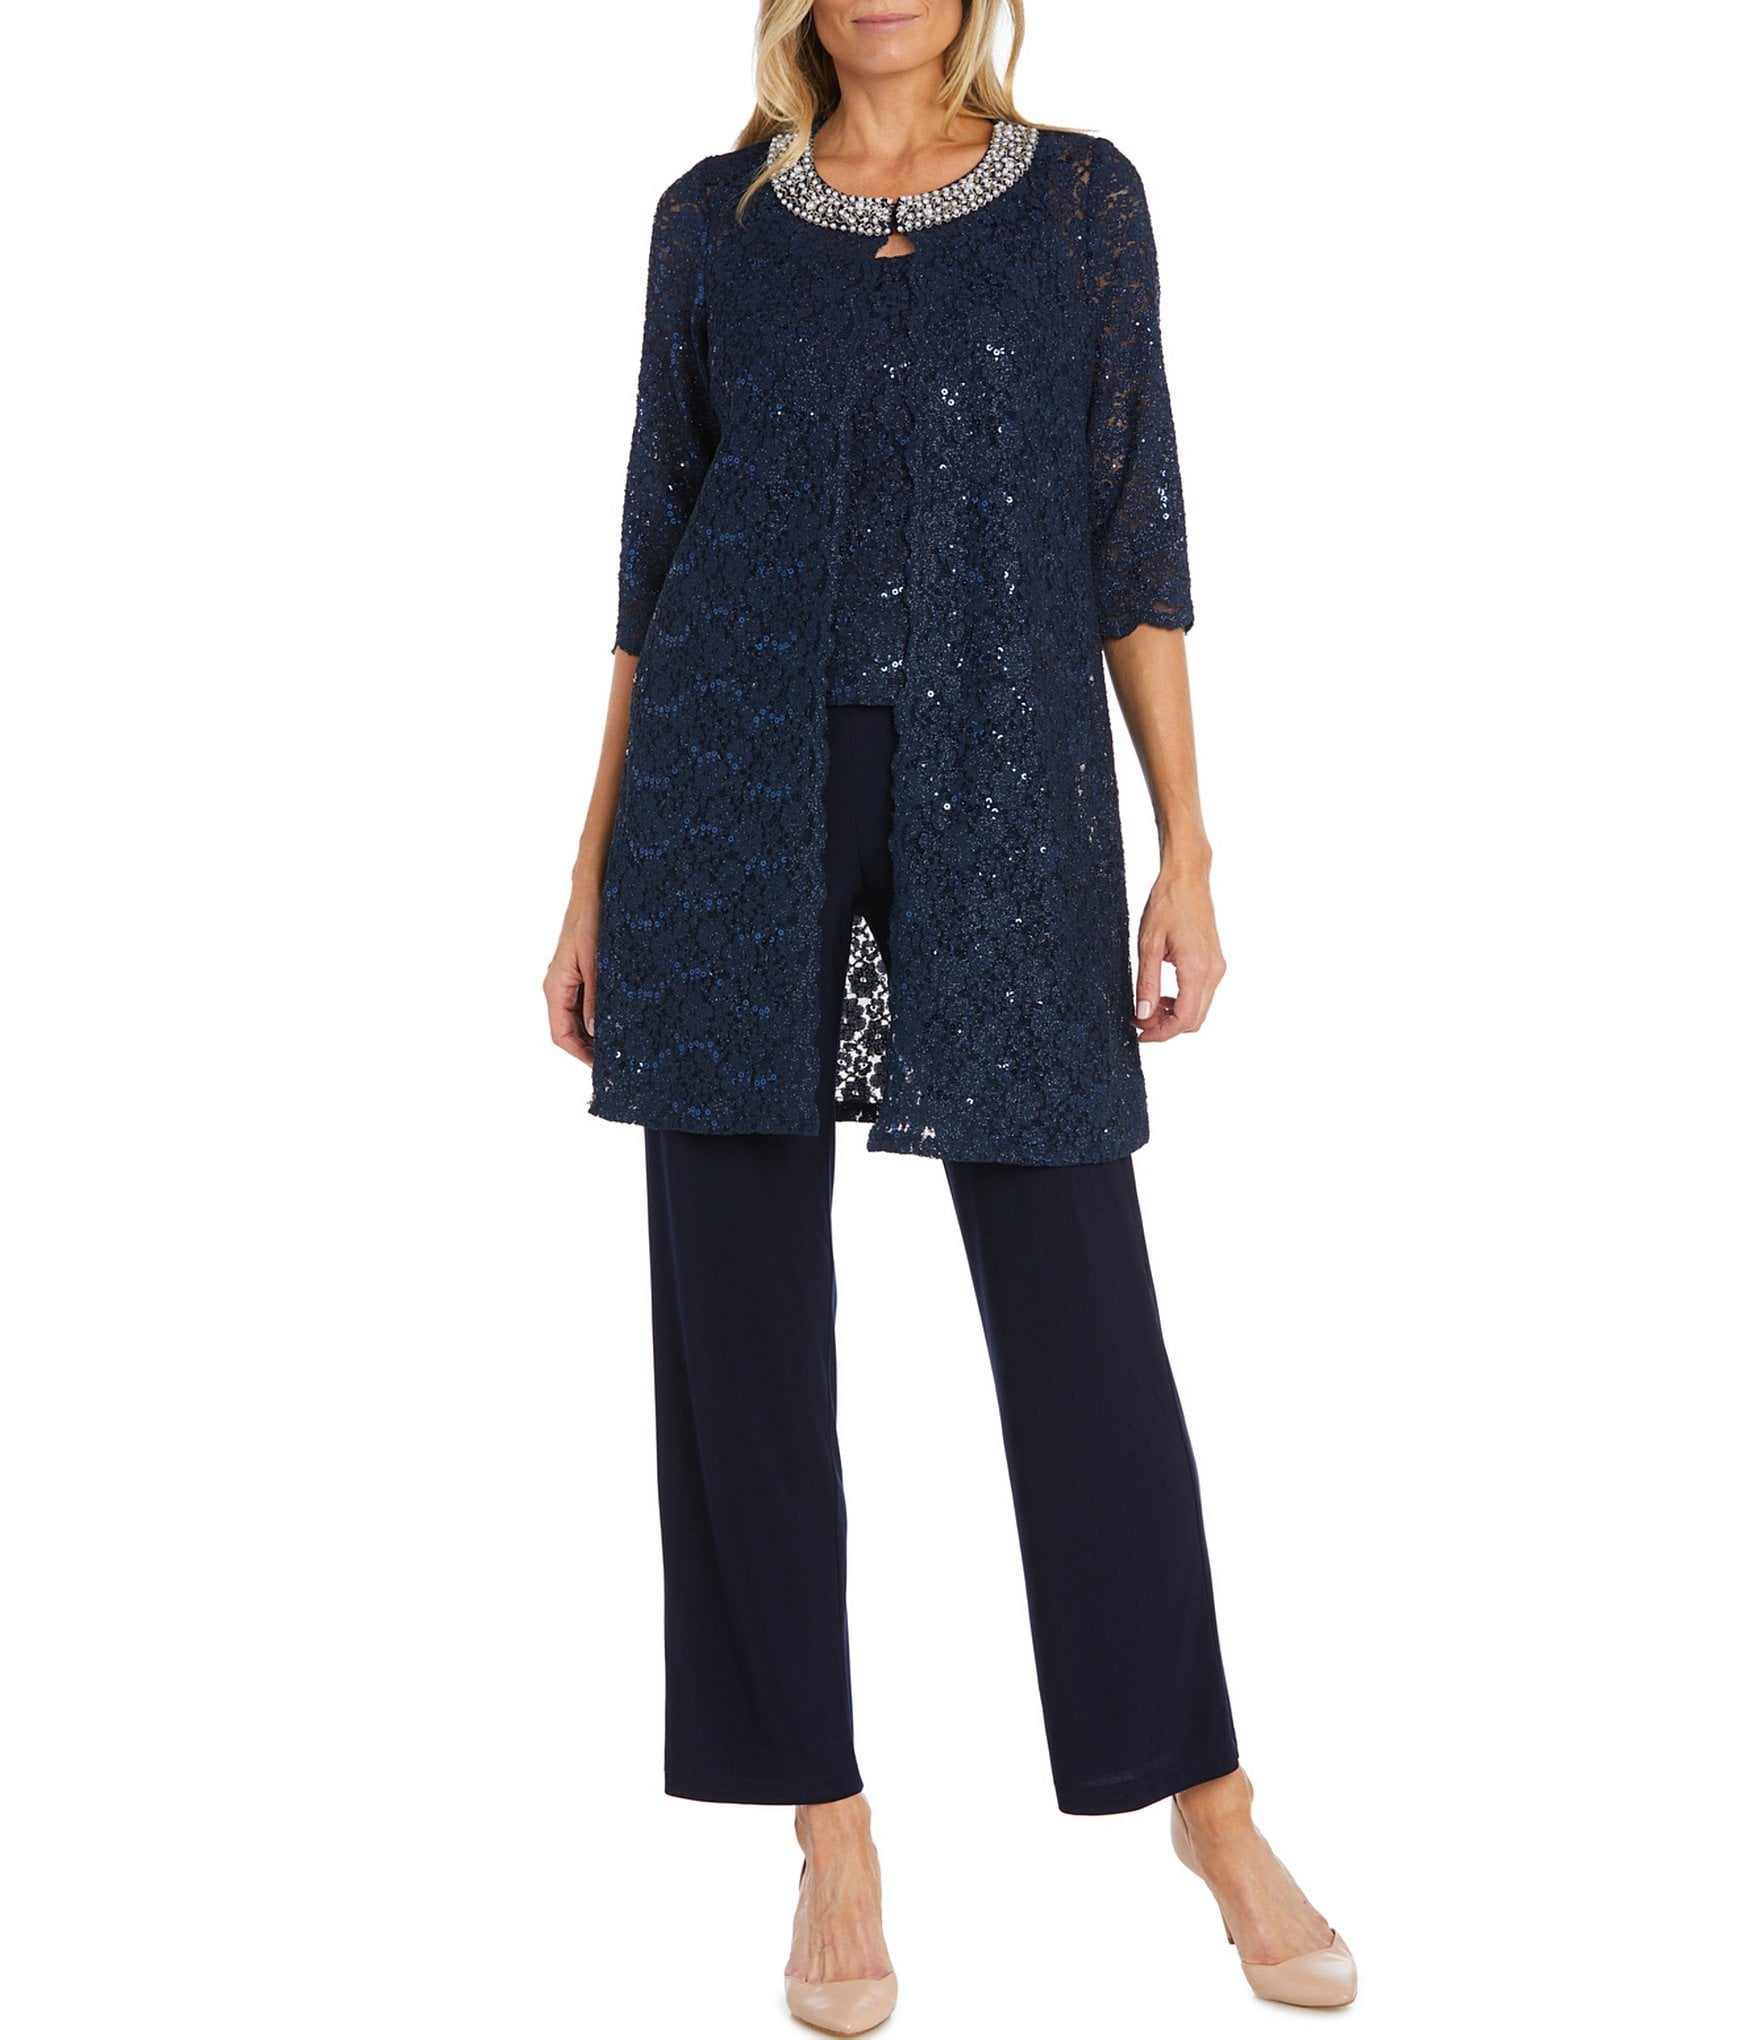 R&M Richards 5008 Mother Of The Bride Pant Suit | The Dress Outlet